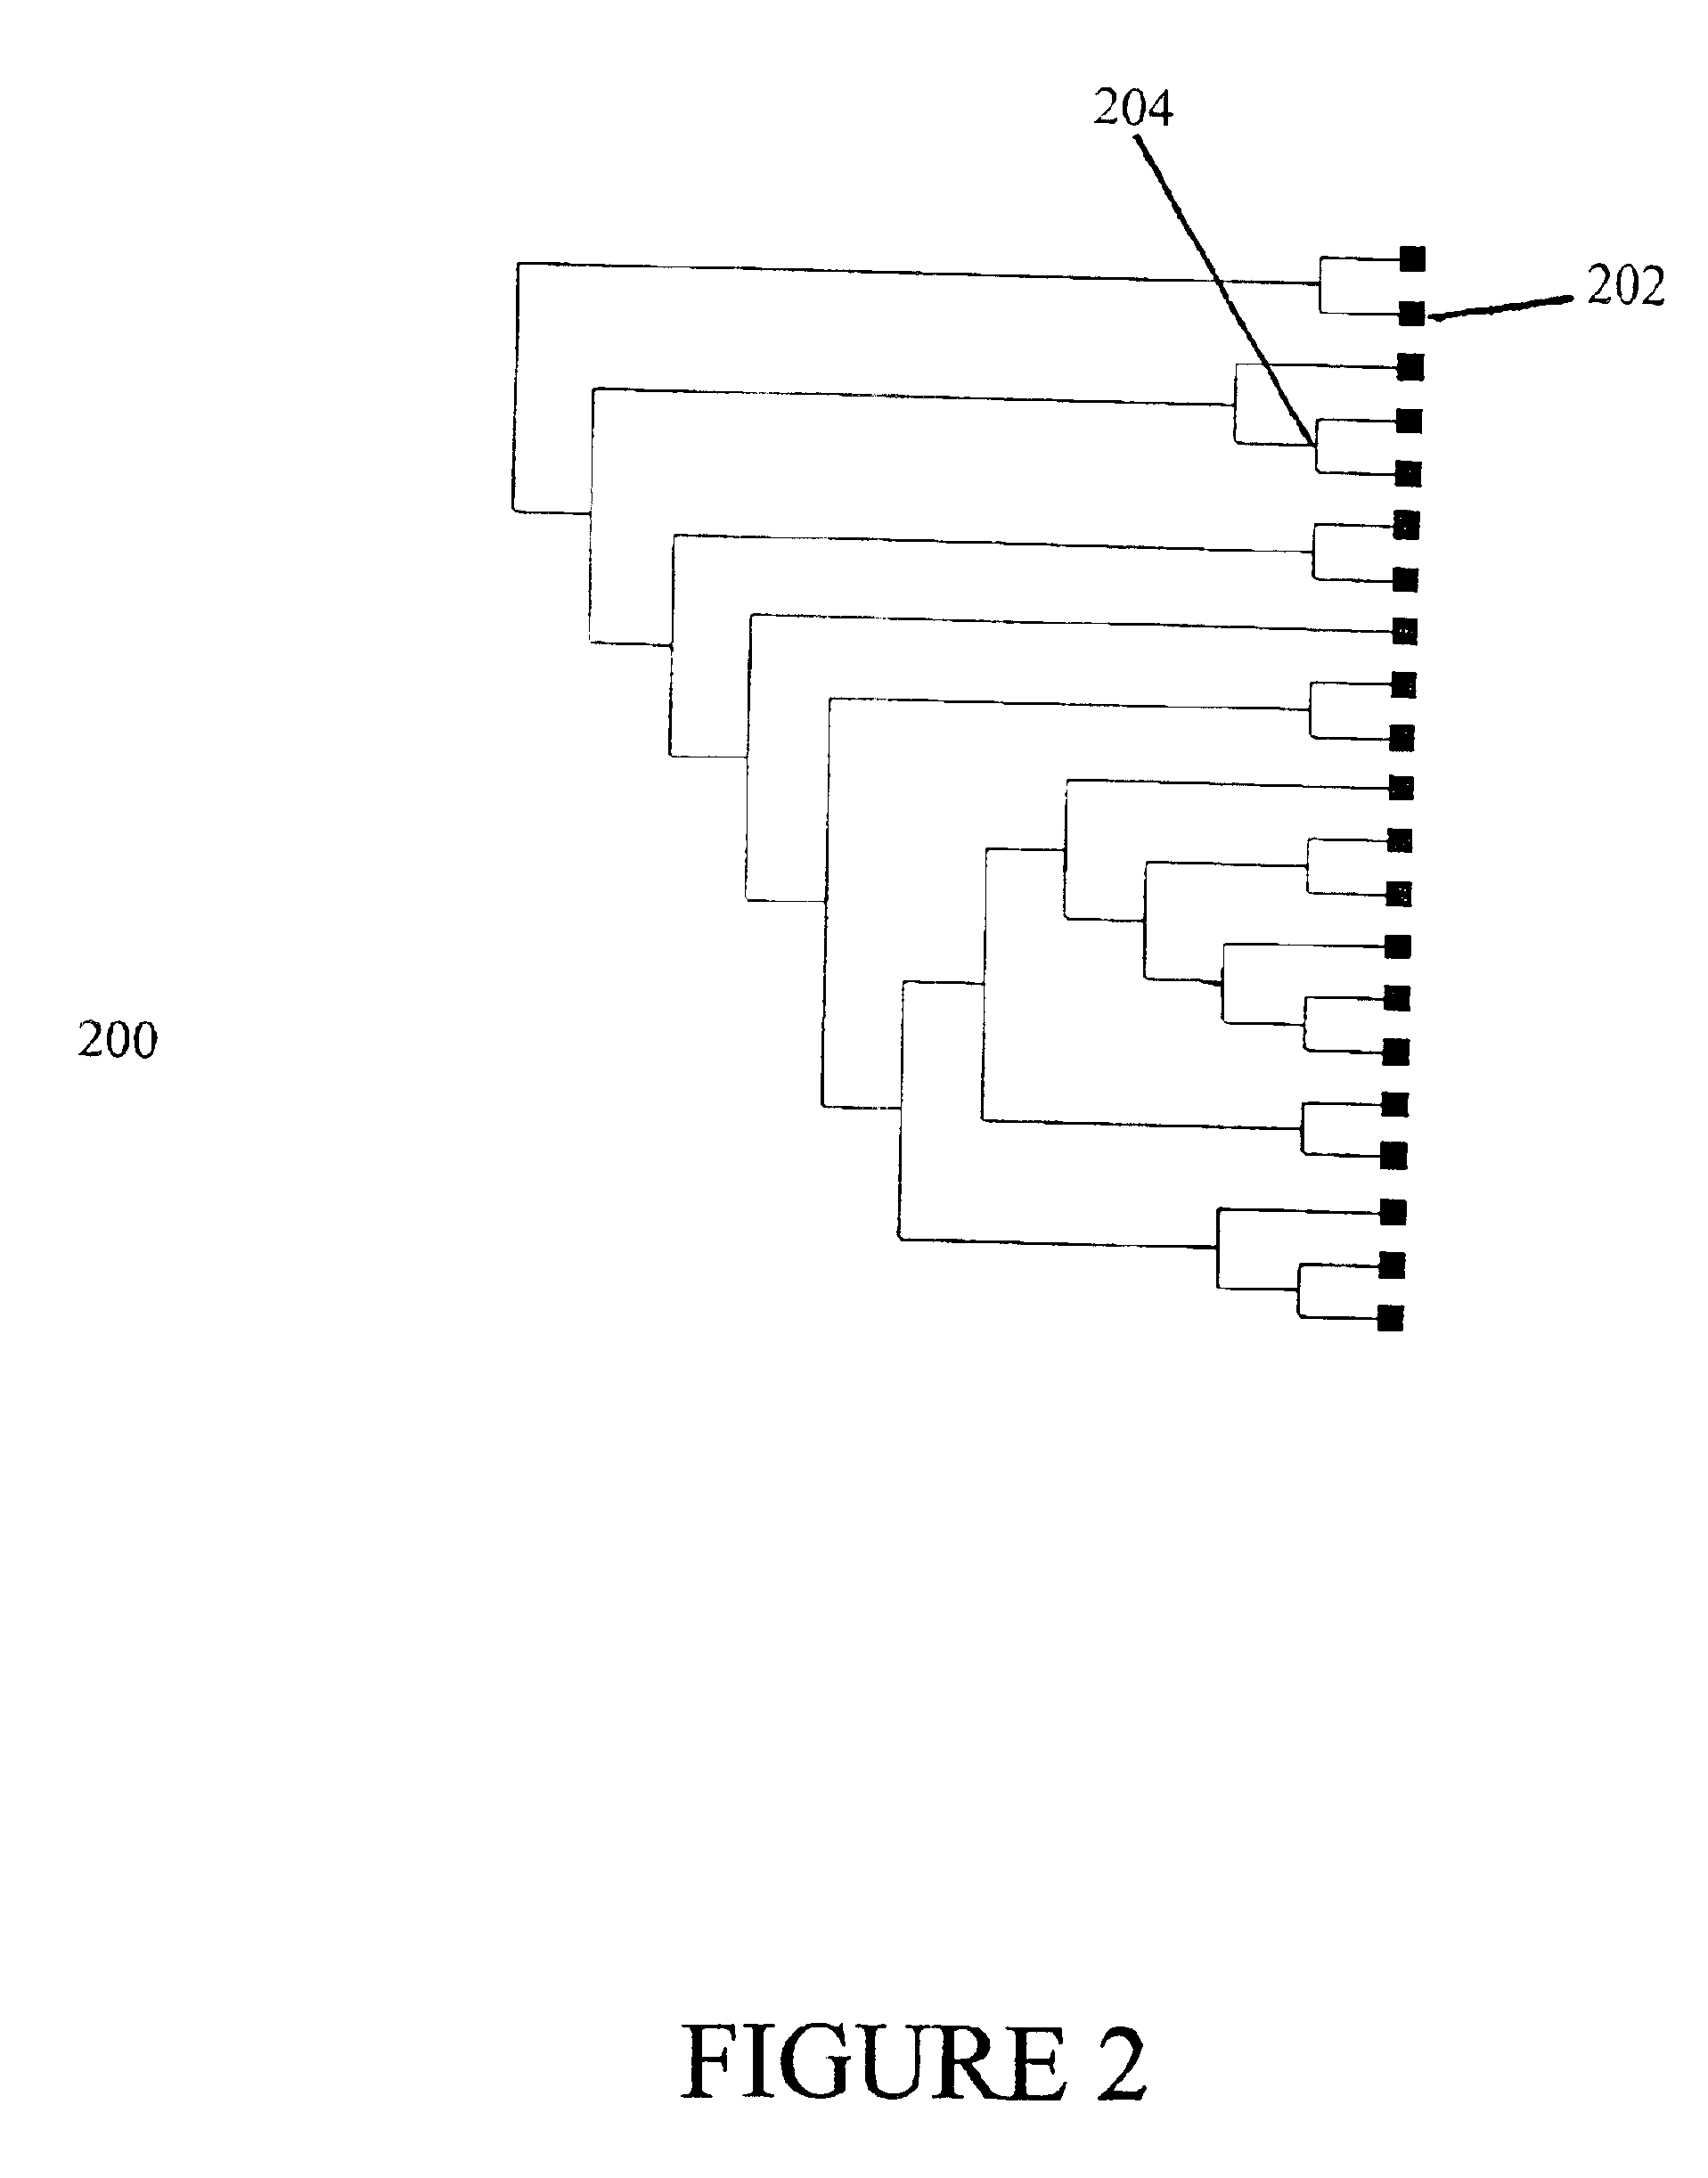 Method for identifying polymorphic markers in a population